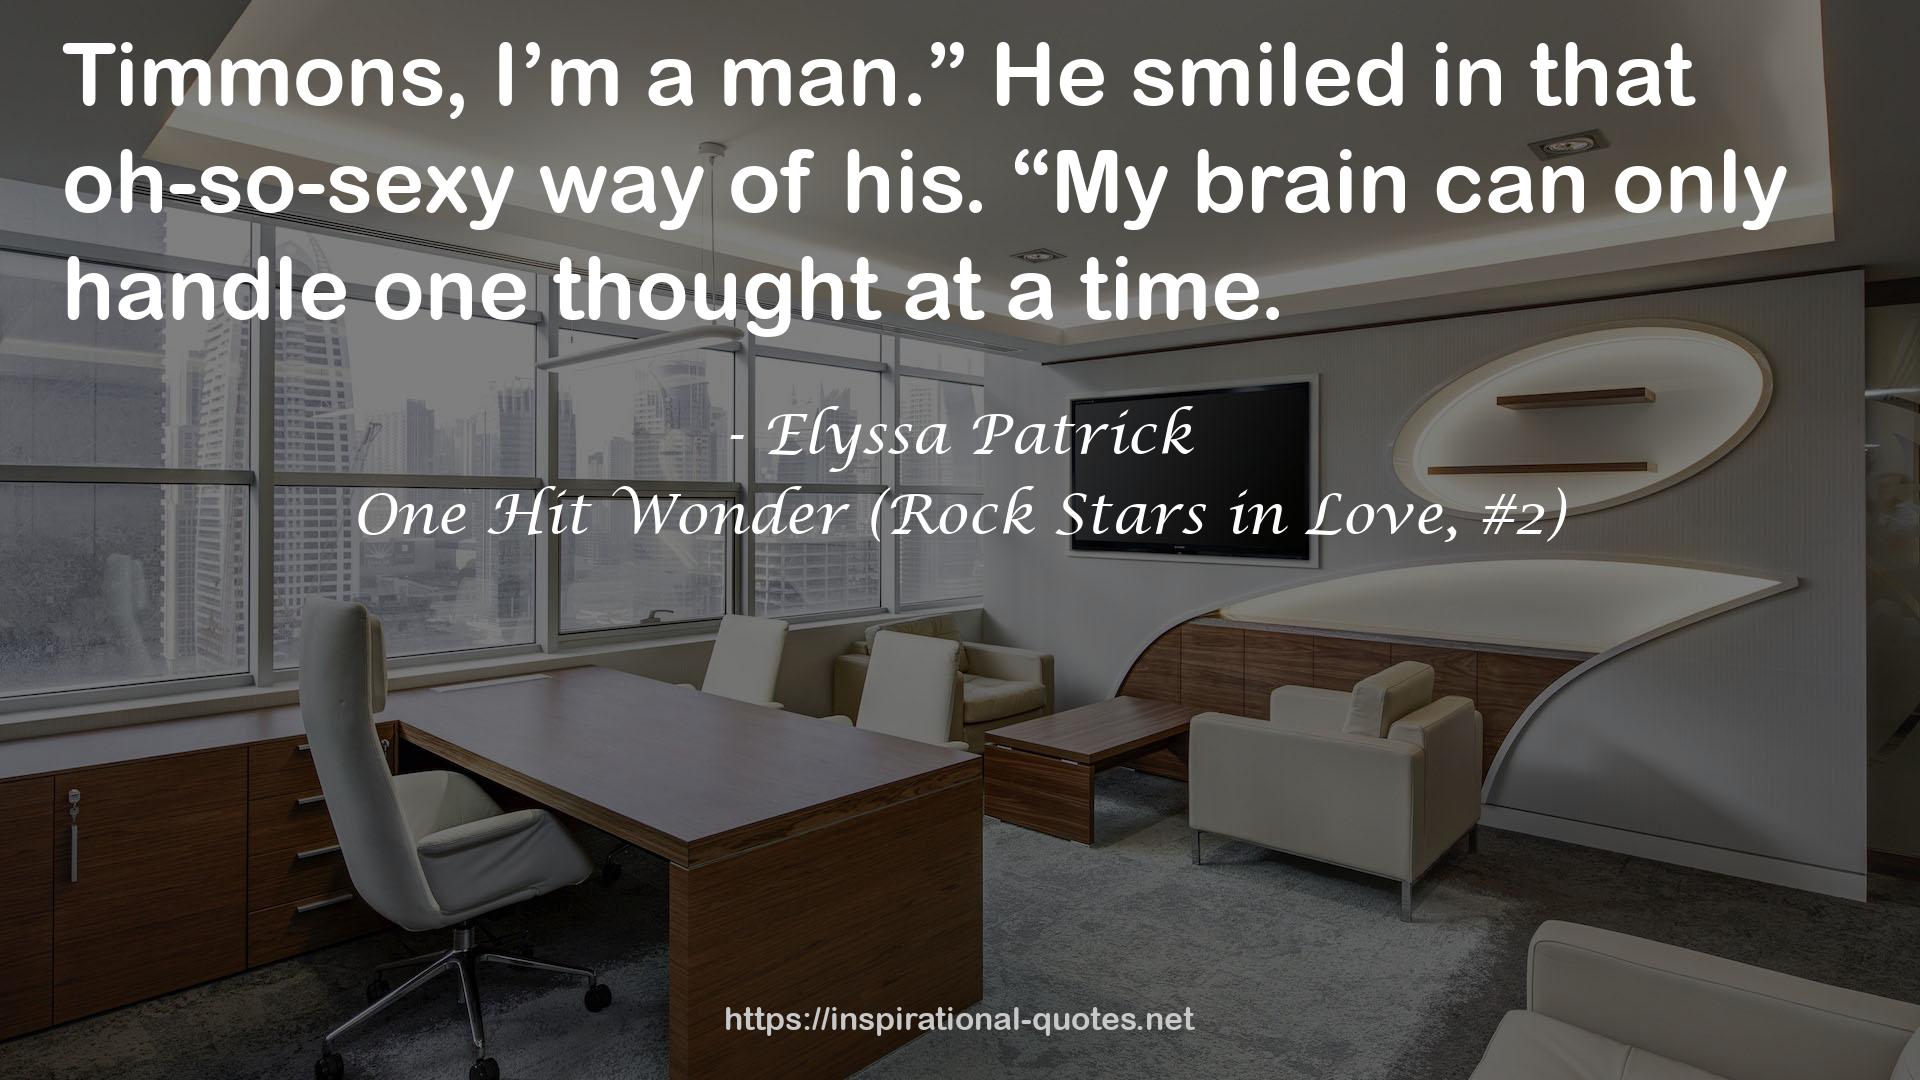 One Hit Wonder (Rock Stars in Love, #2) QUOTES